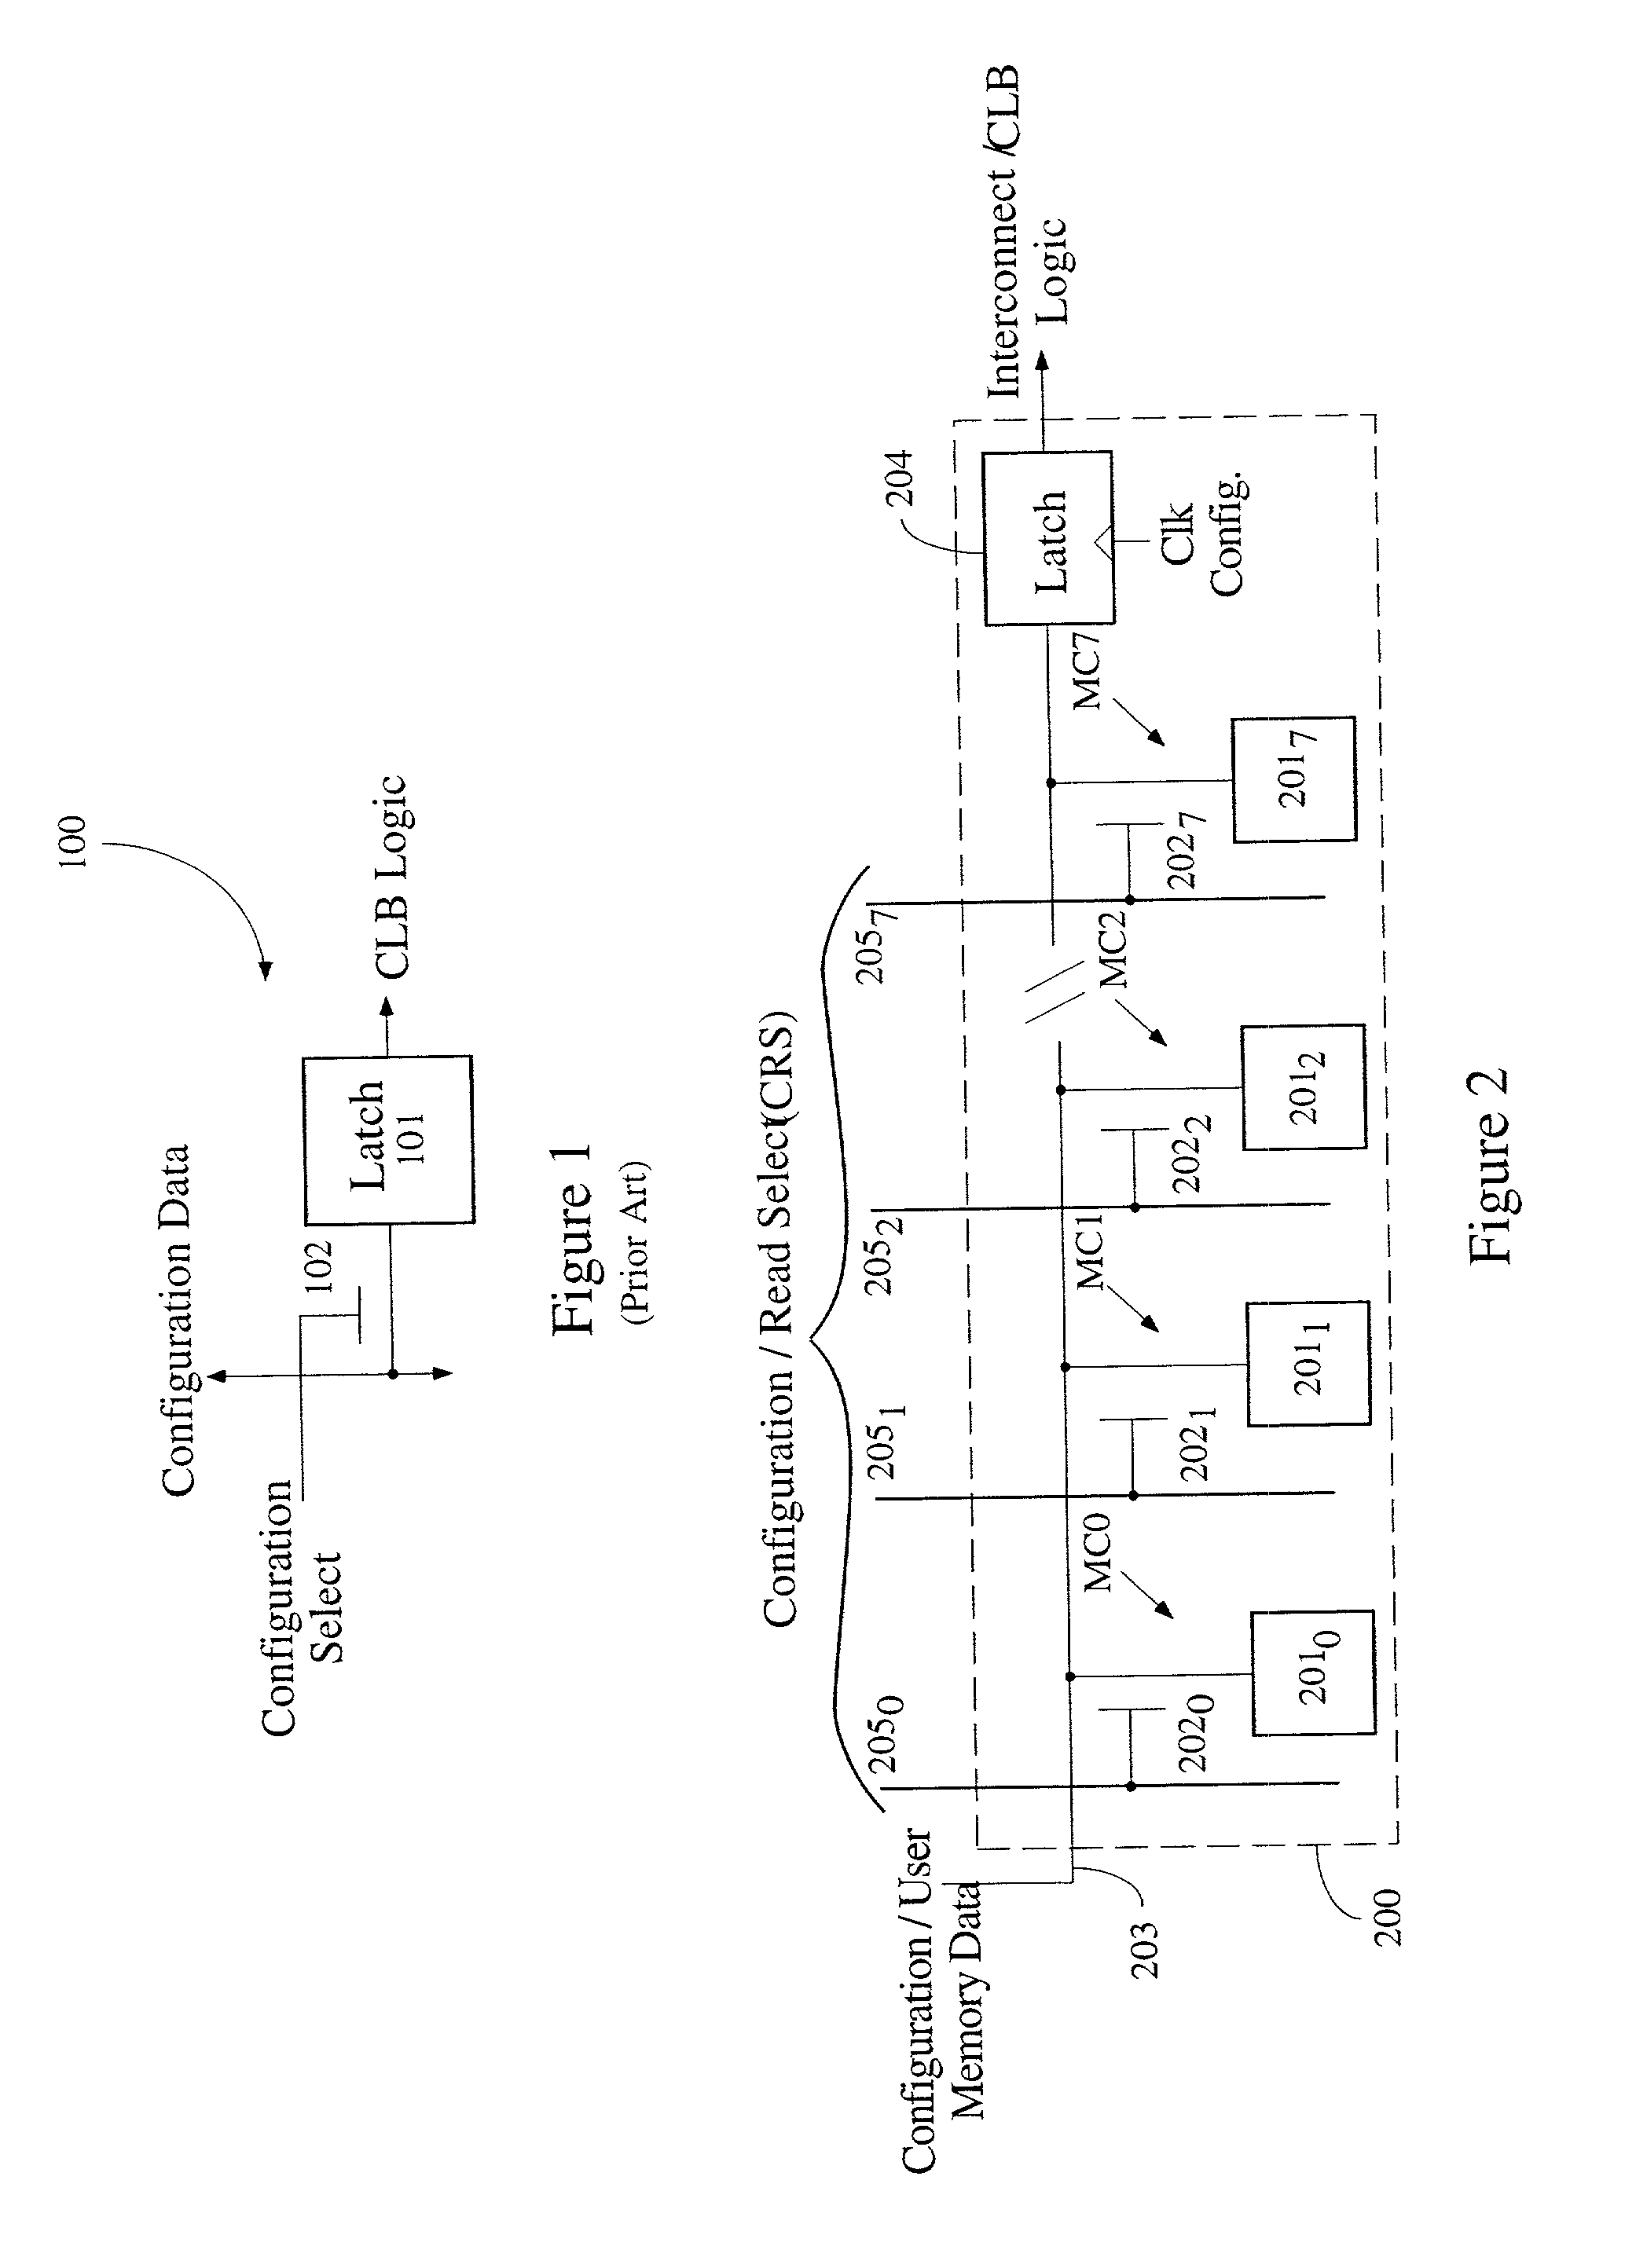 Method of time multiplexing a programmable logic device